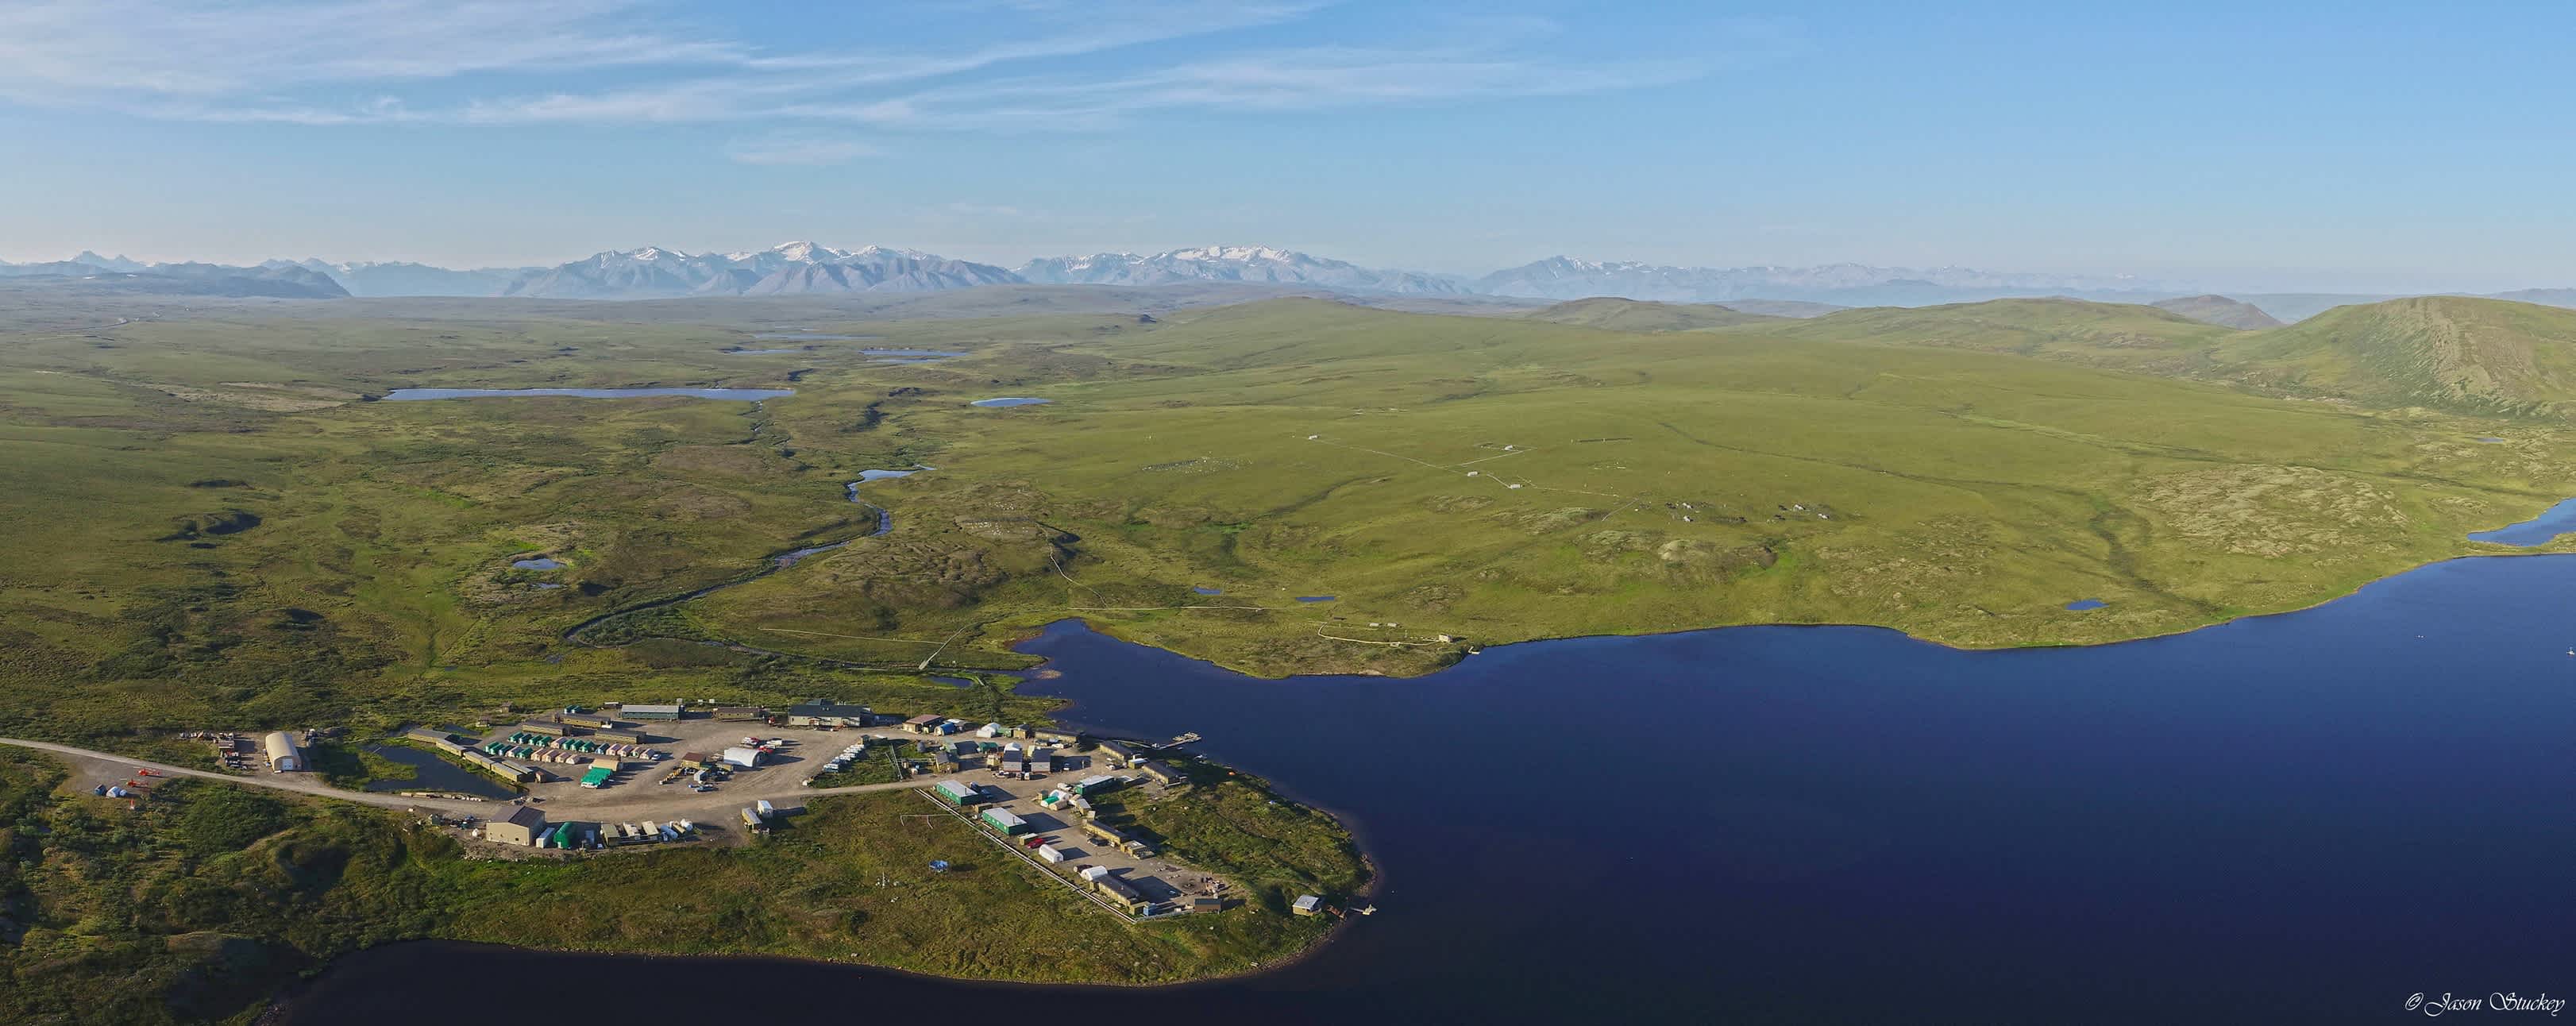 Image of the Toolik Field Station